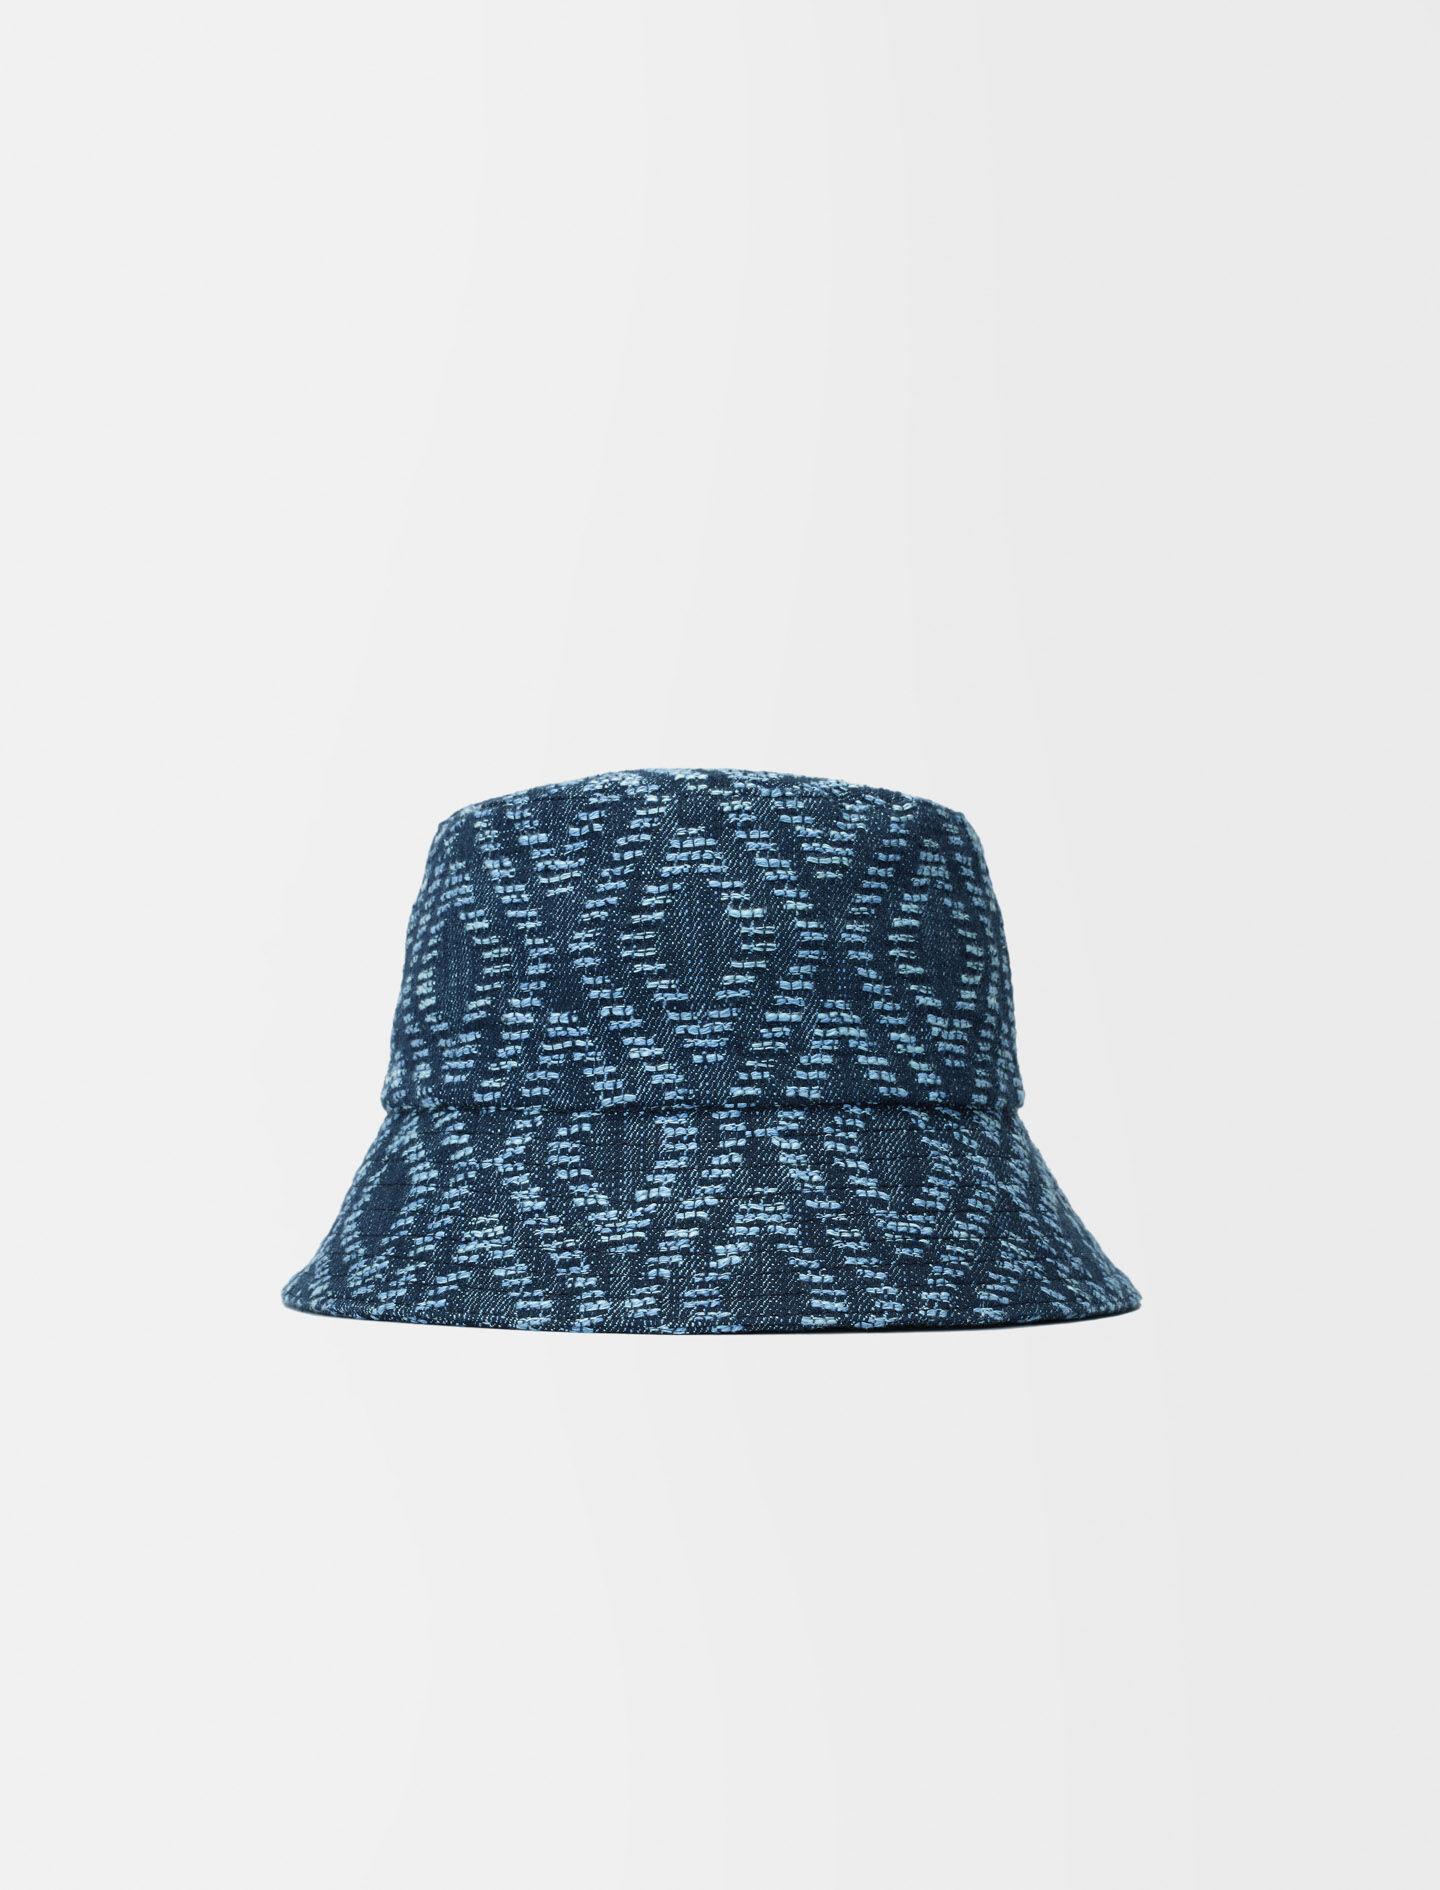 Maje Bucket Hat With Graphic Print in Blue | Lyst